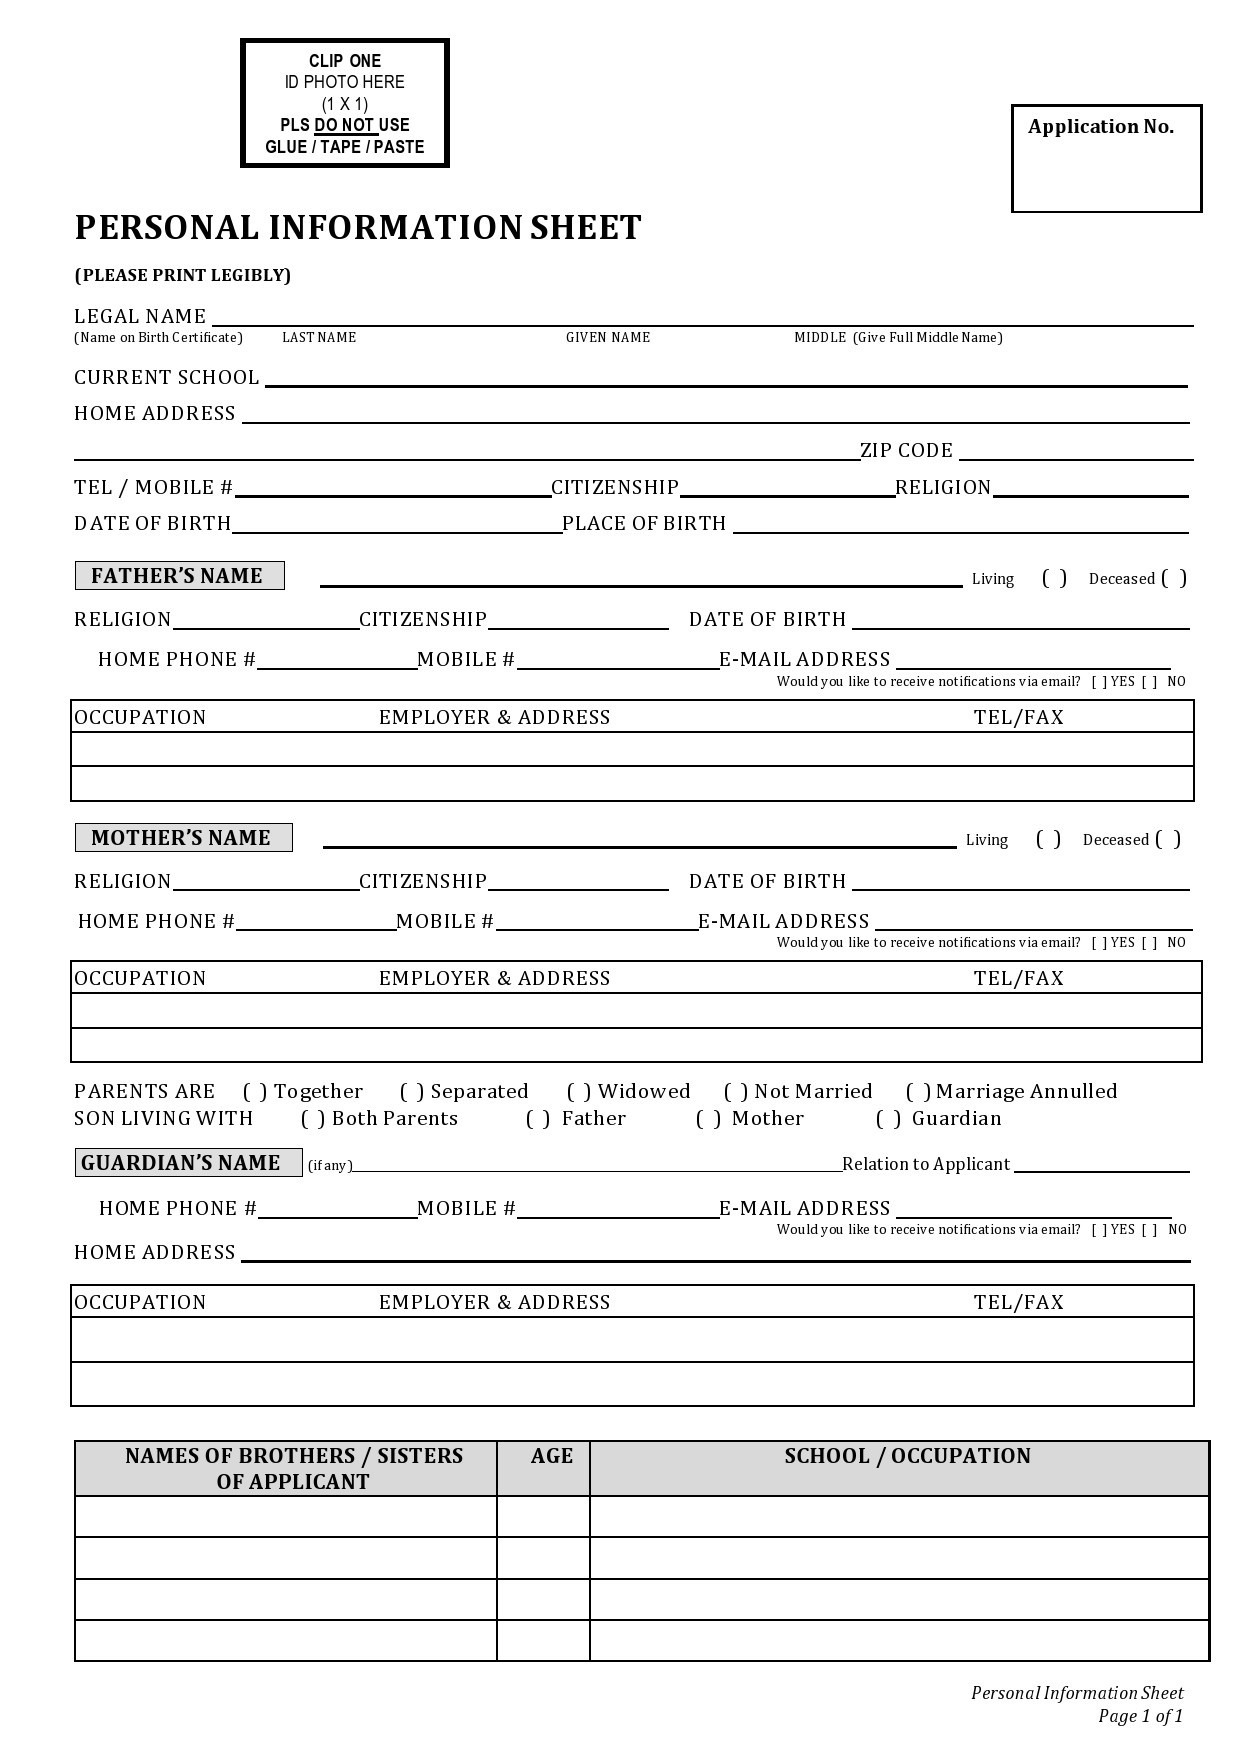 Free personal information form 39